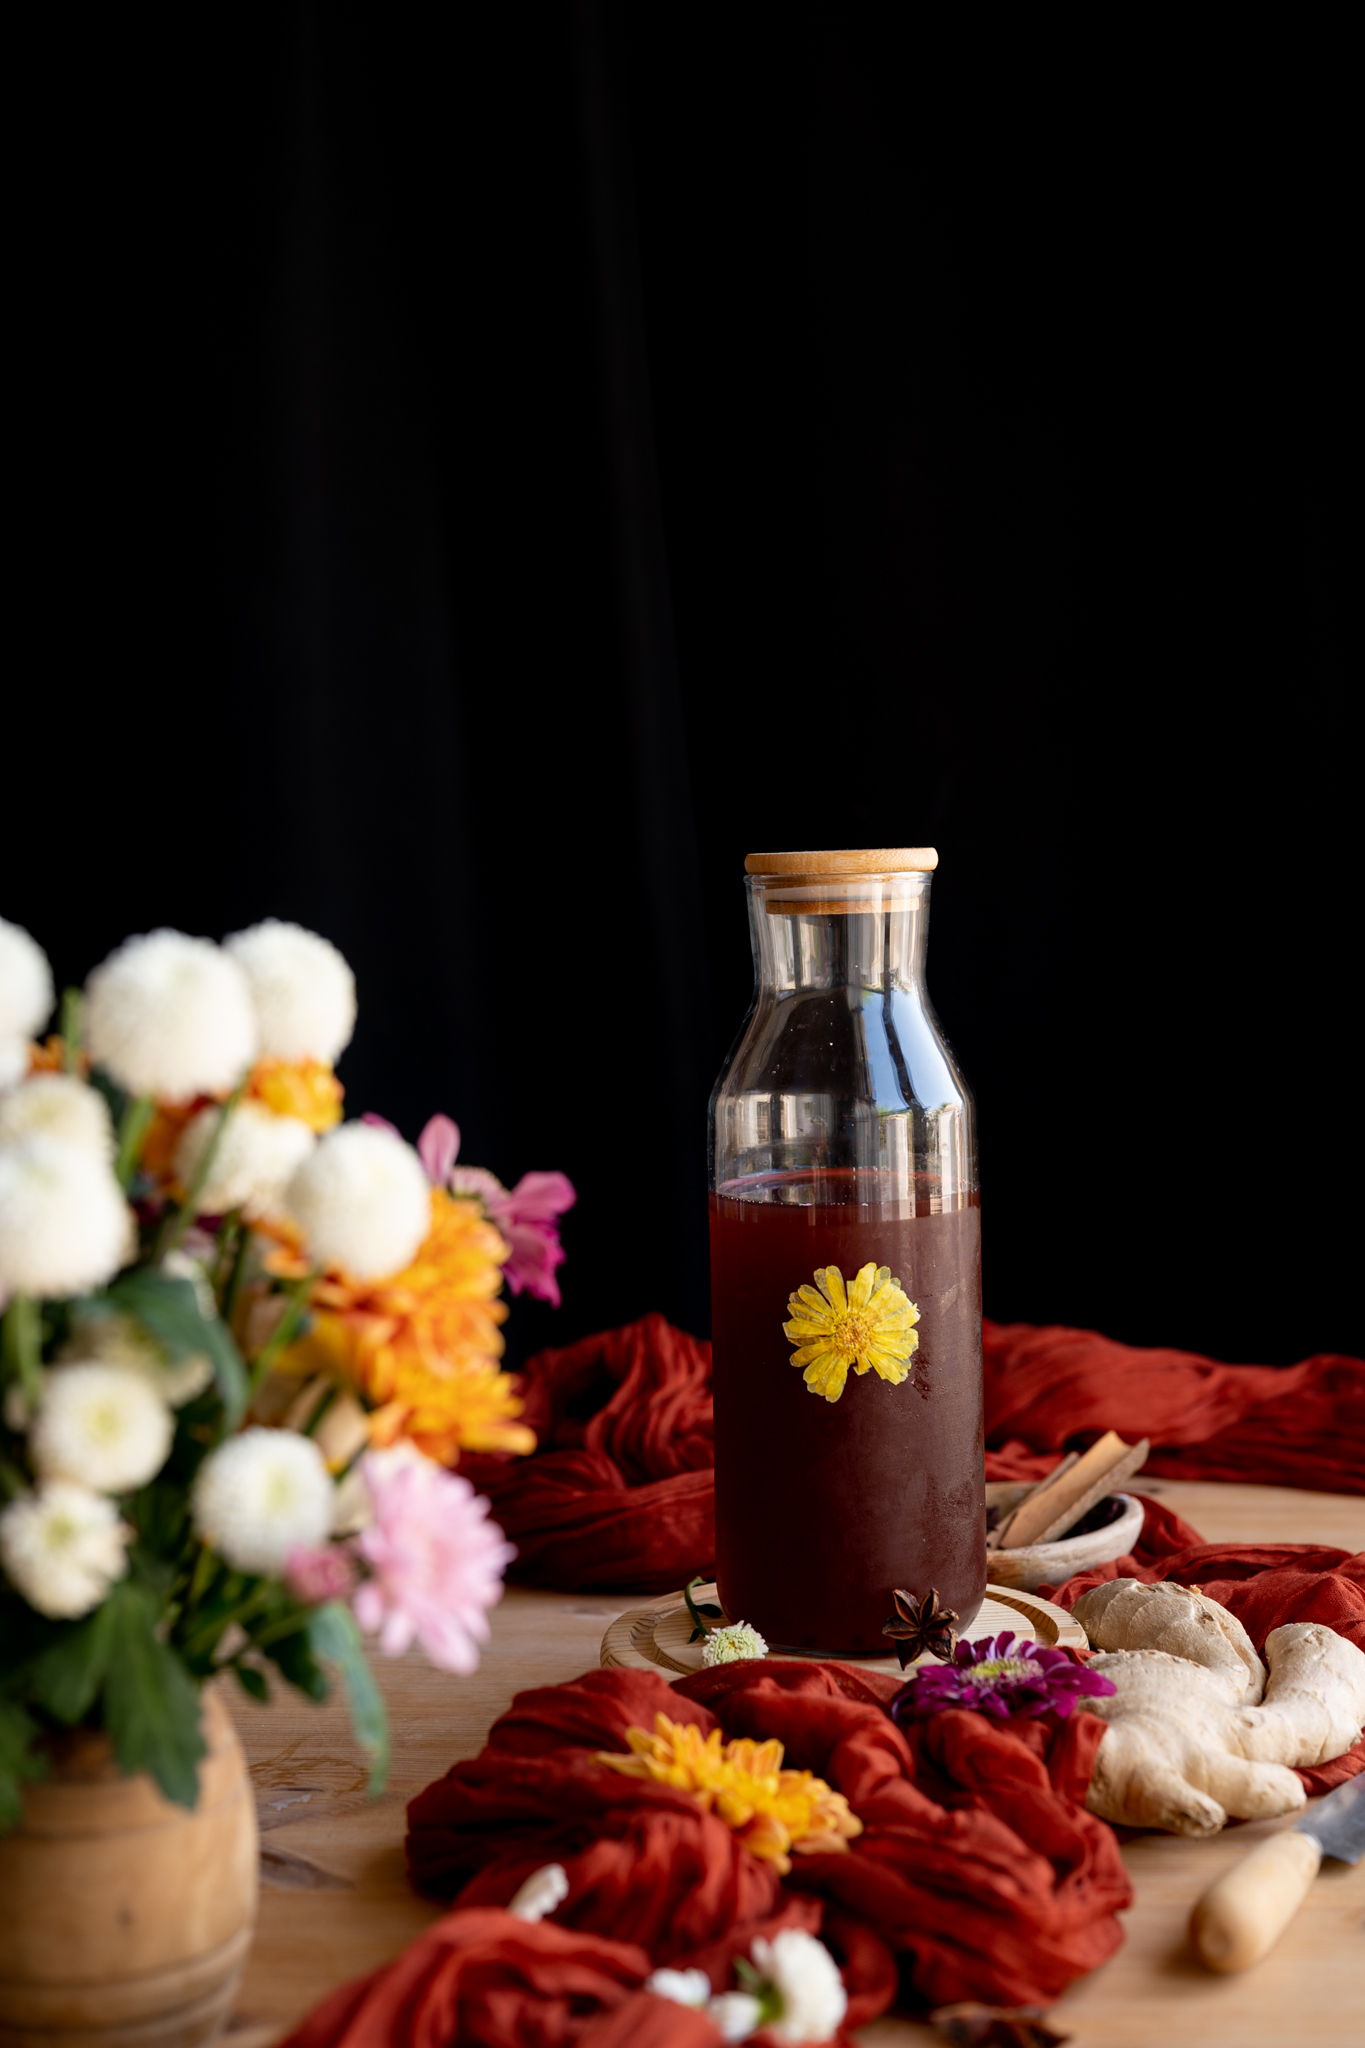 close up image of stovetop herbal spiced cider next to autumn bouquet of flowers